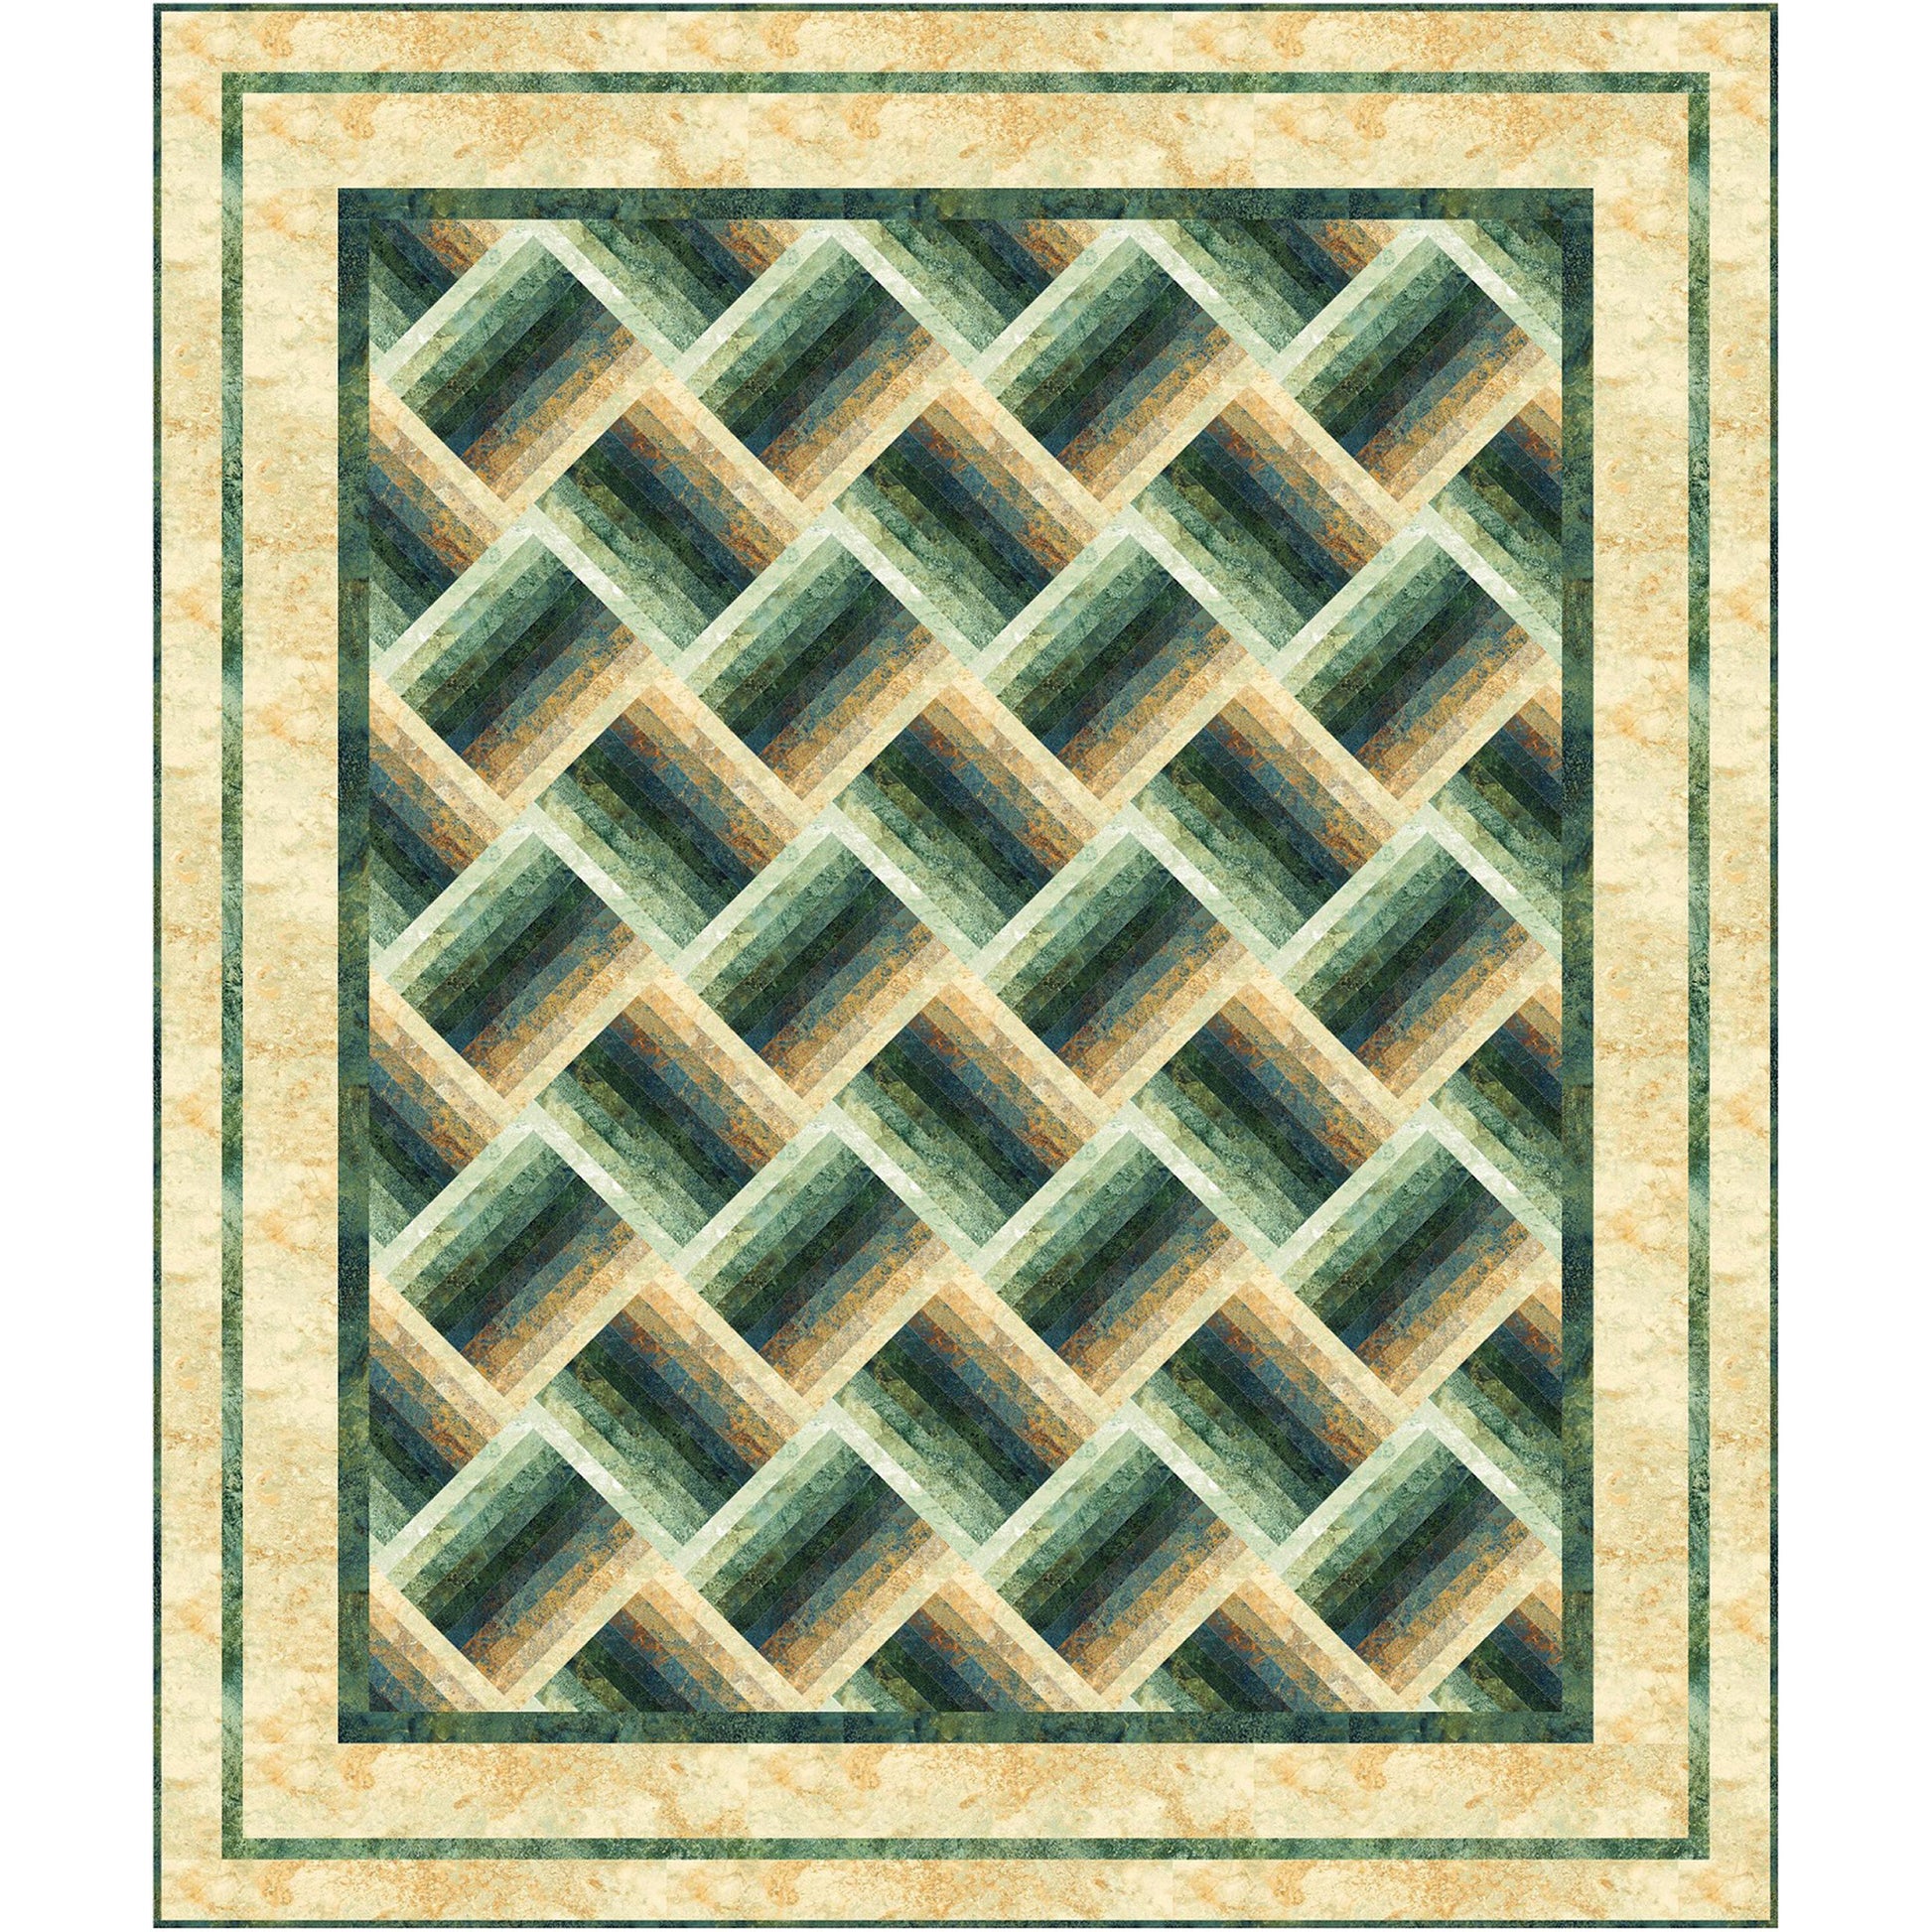 Elegant greens and yellows geometric pattern quilt looks a lot like a basket weave at an angle.